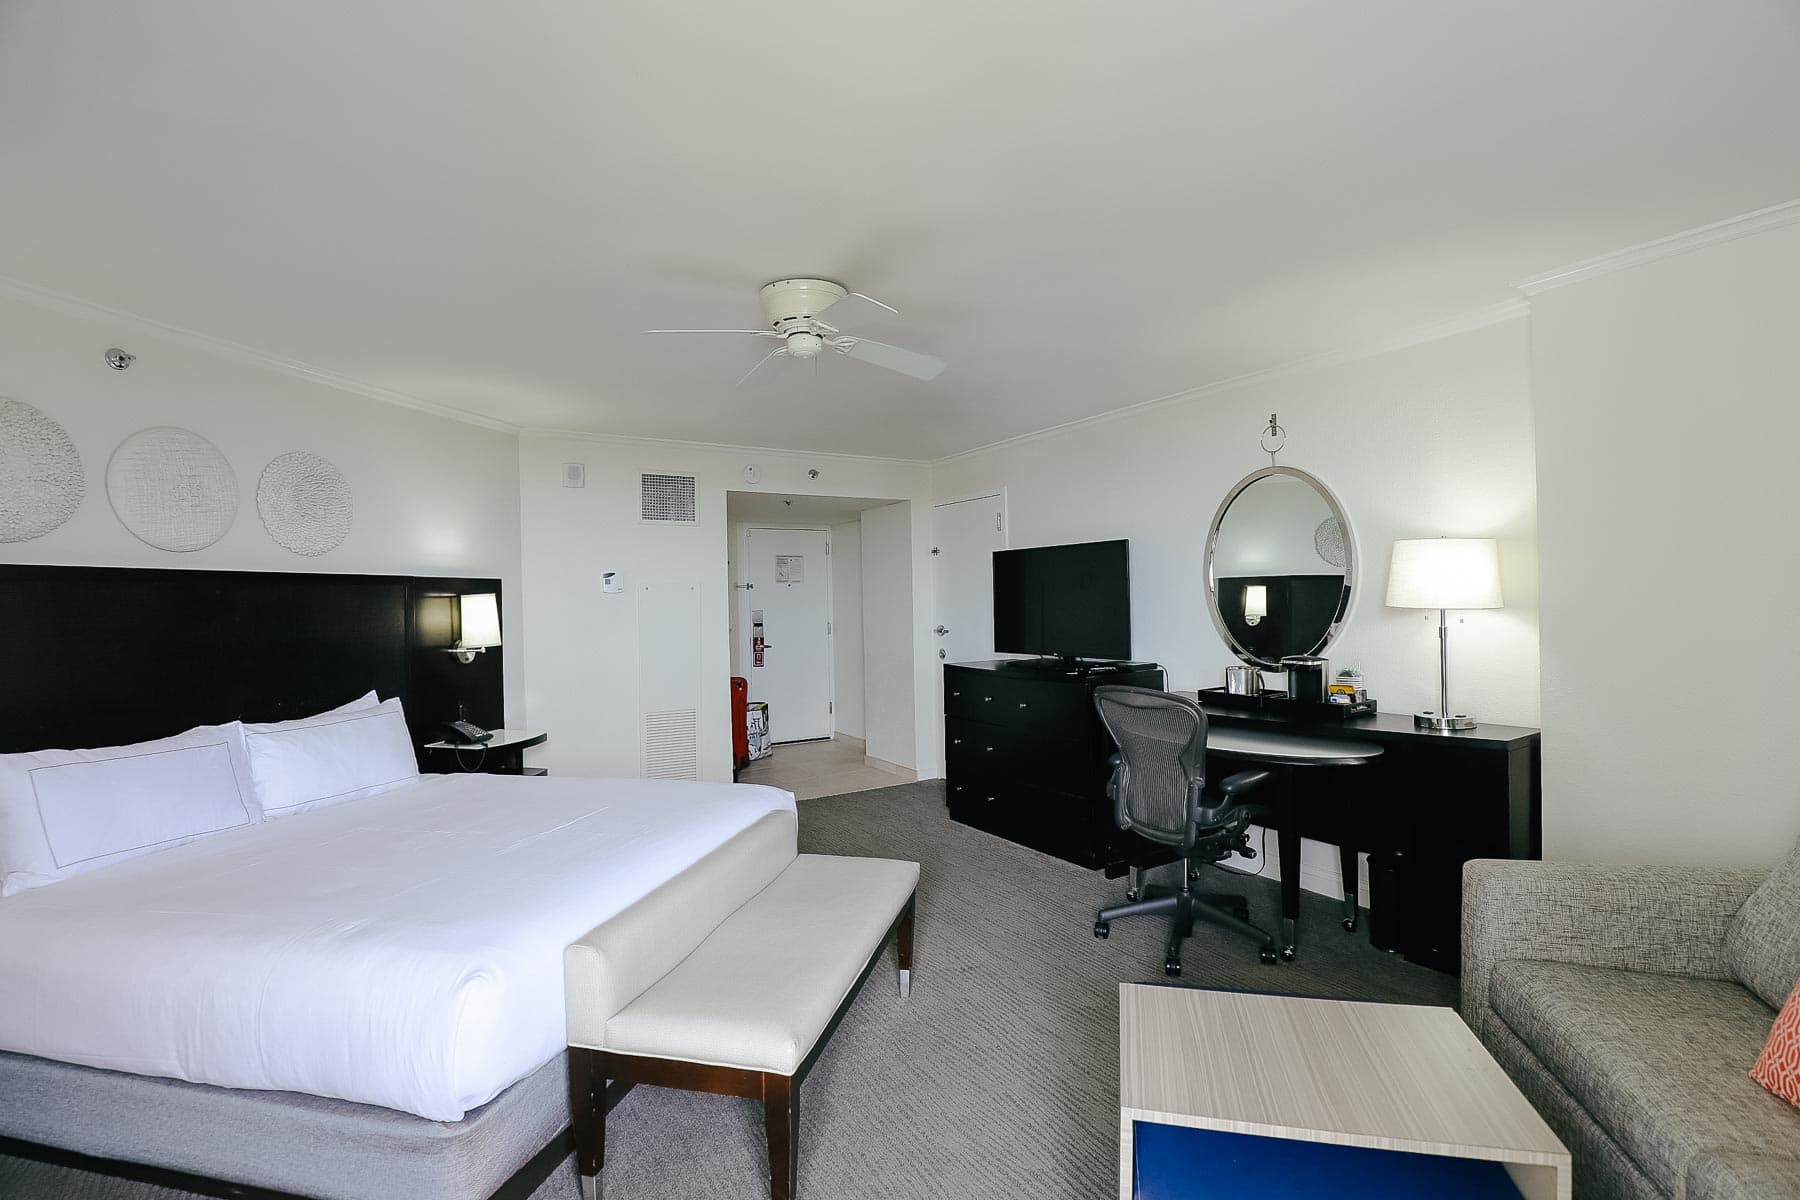 off-site hotel room with suite layout near Disney World